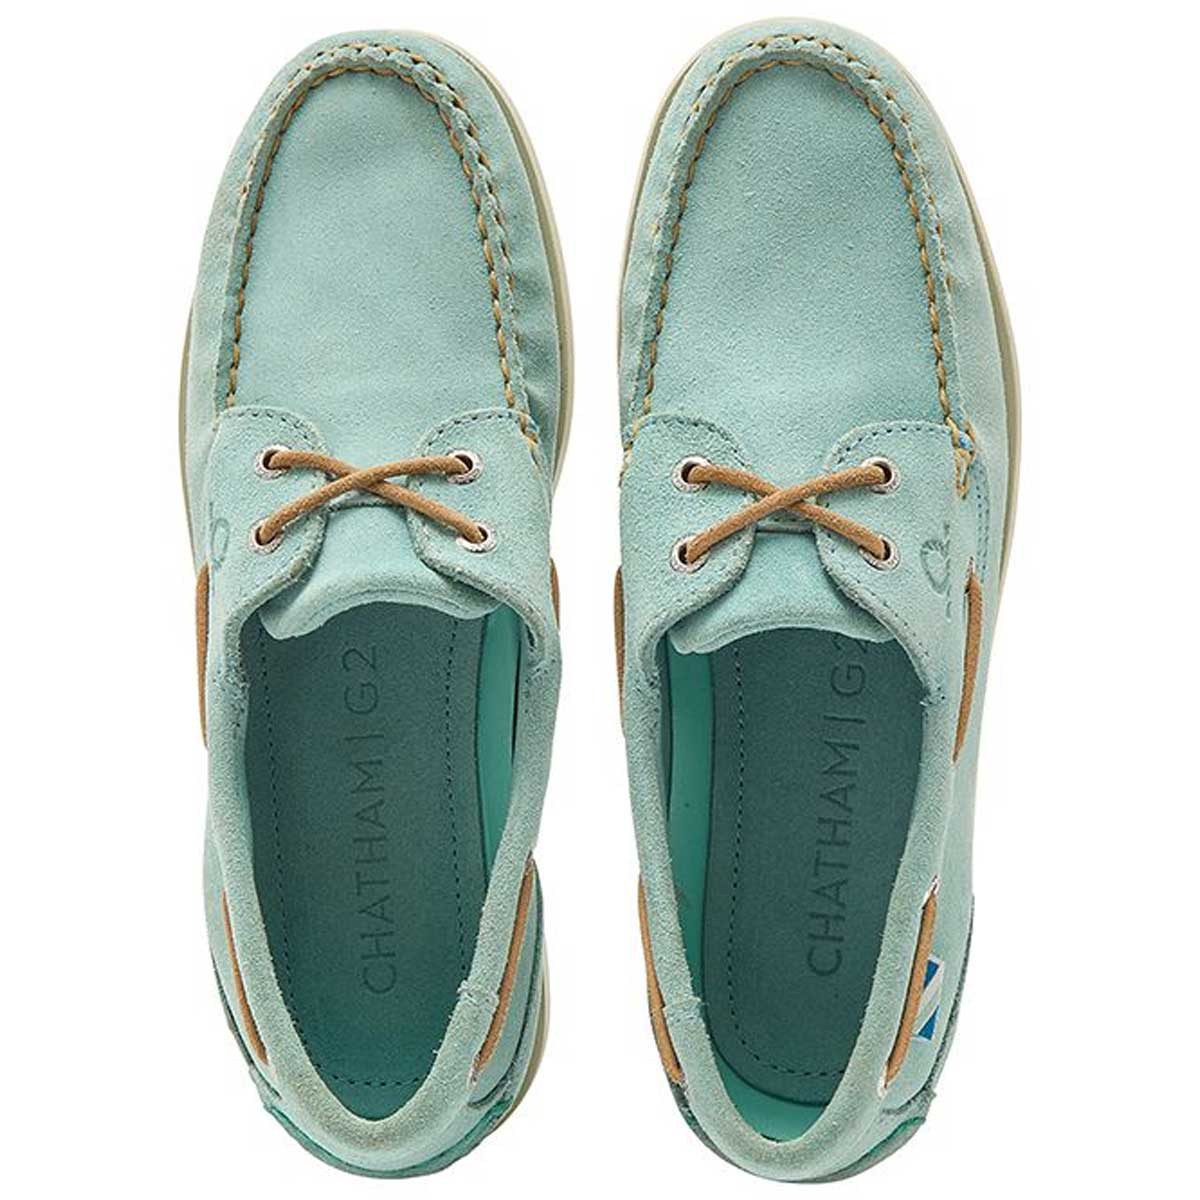 CHATHAM Pippa II G2 Repello Boat Shoes - Women's - Pale Jade Suede